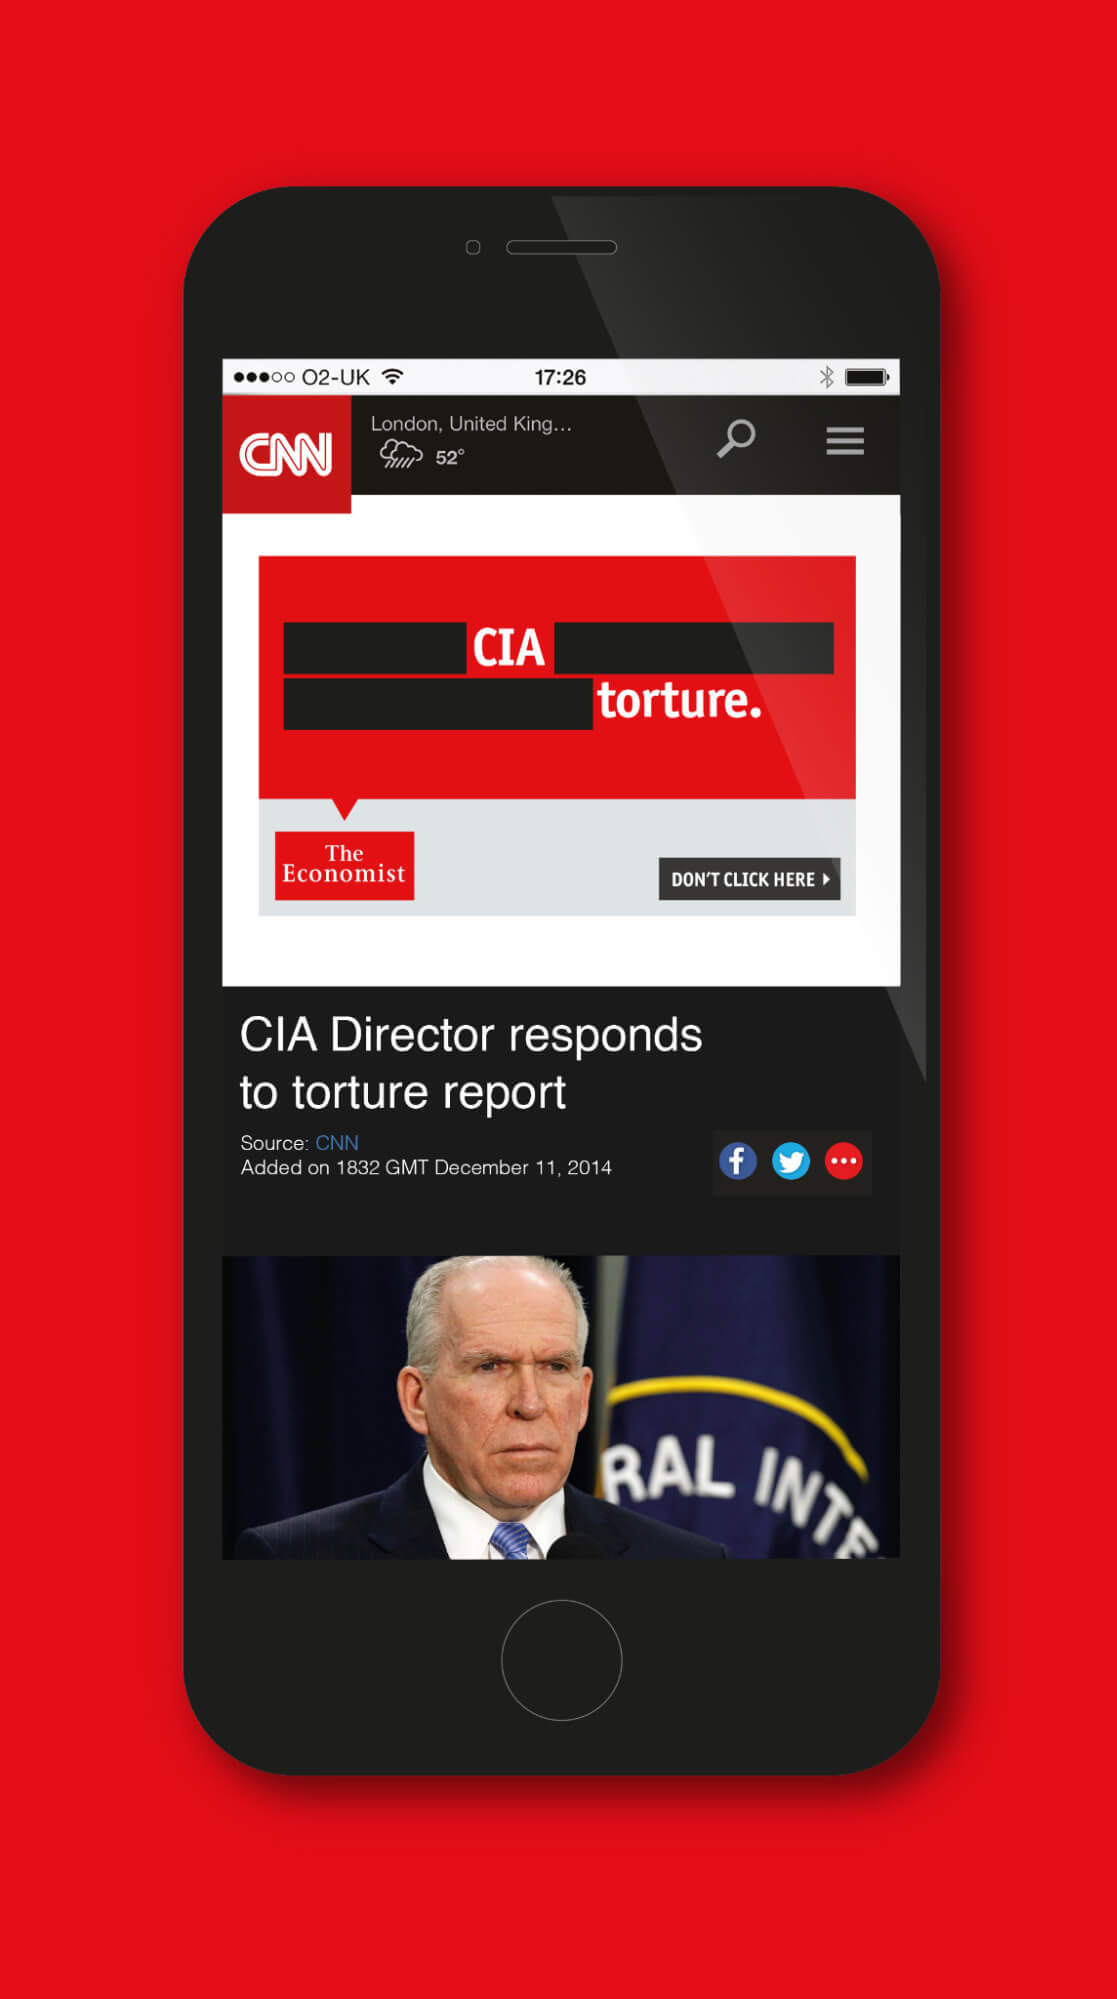 Banner ad example from CNN